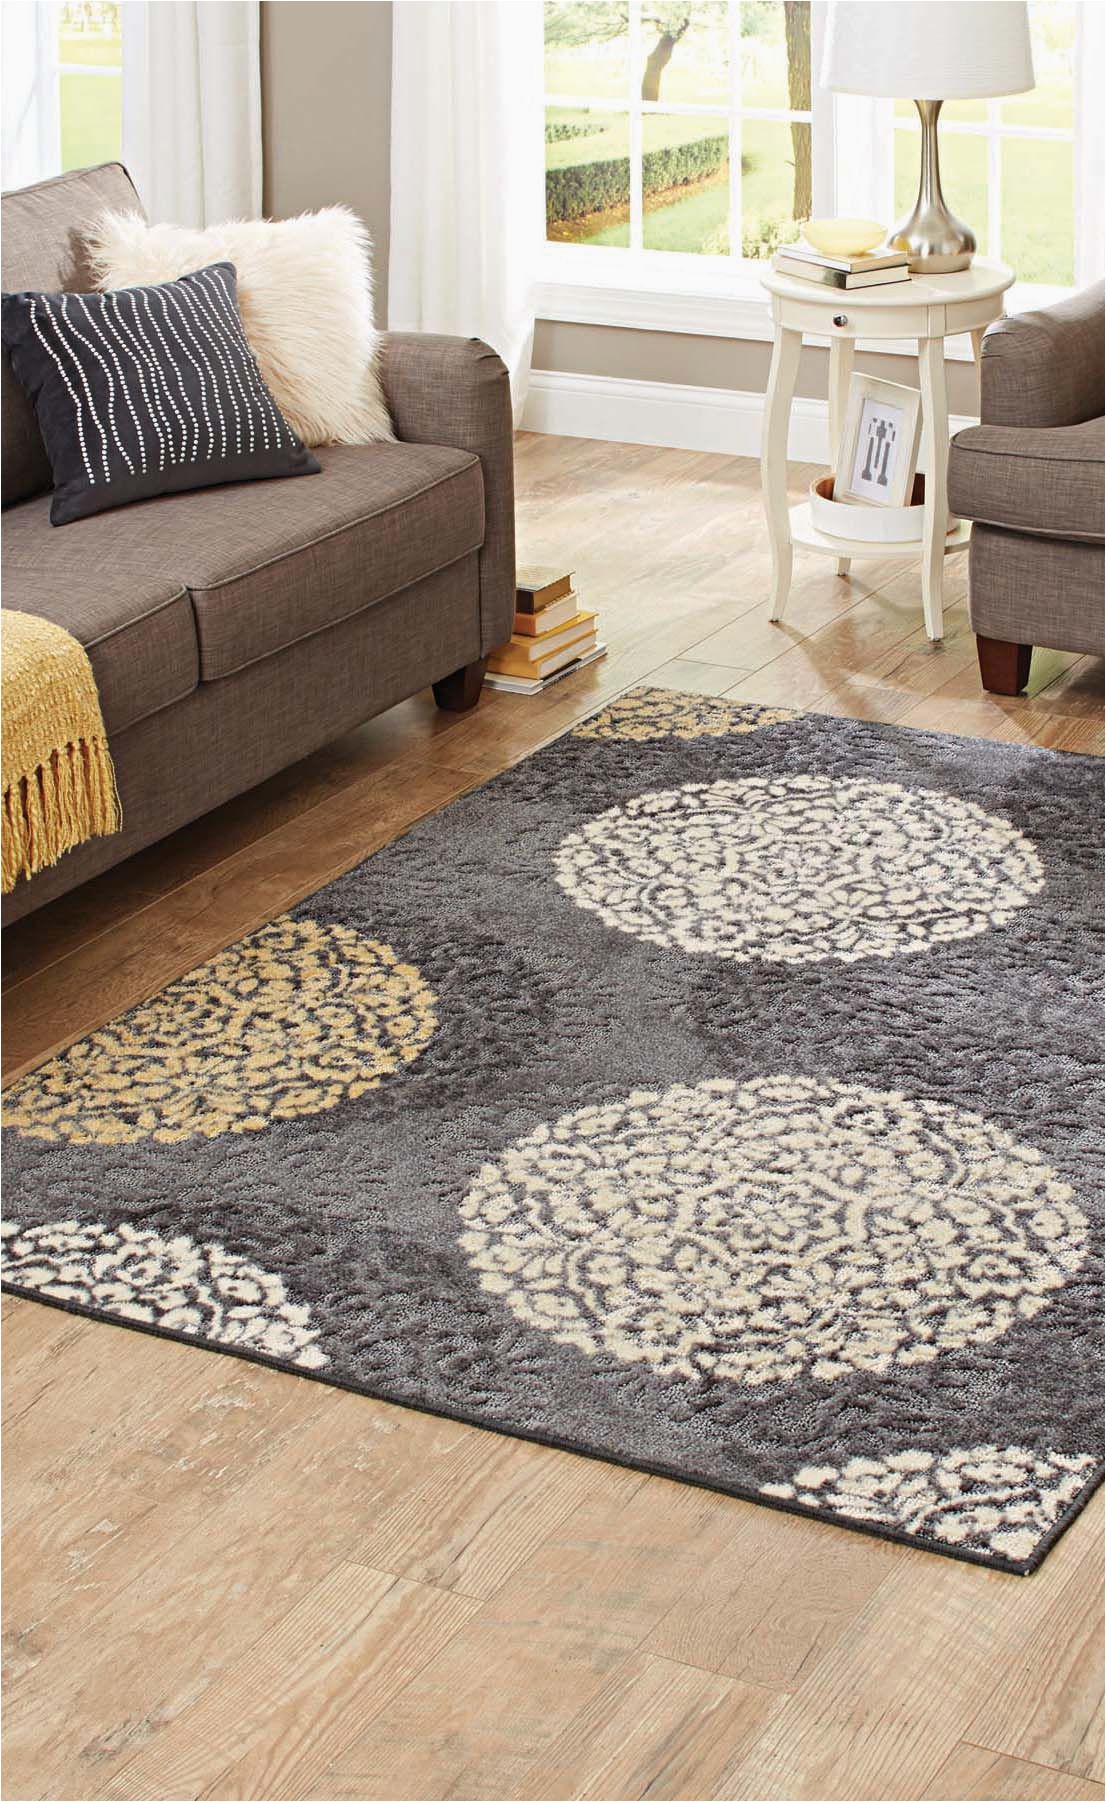 Better Homes and Gardens Gina area Rug Better Homes & Gardens Overlapping Medallions Print area Rug